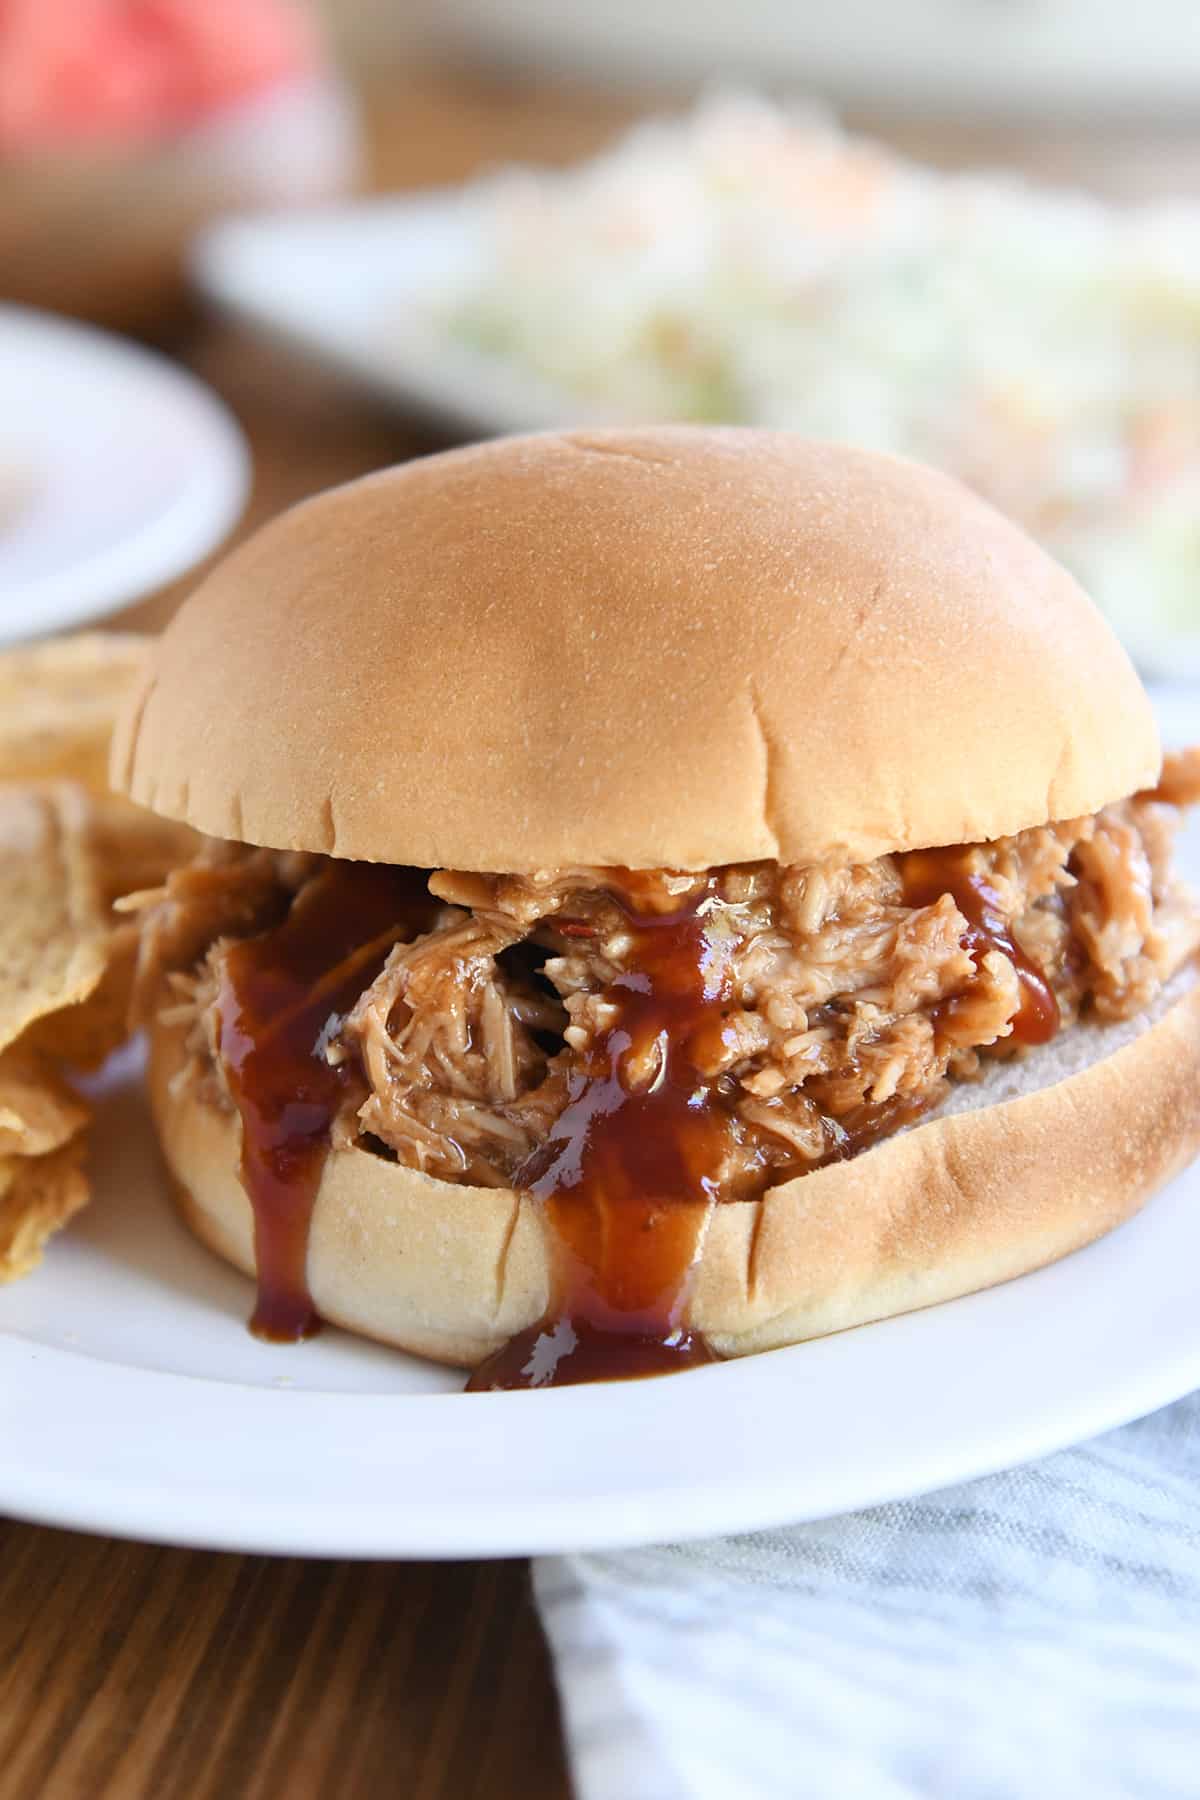 How to cook barbecue pulled pork in a crock pot Bbq Pulled Pork Sandwiches Slow Cooker Mel S Kitchen Cafe